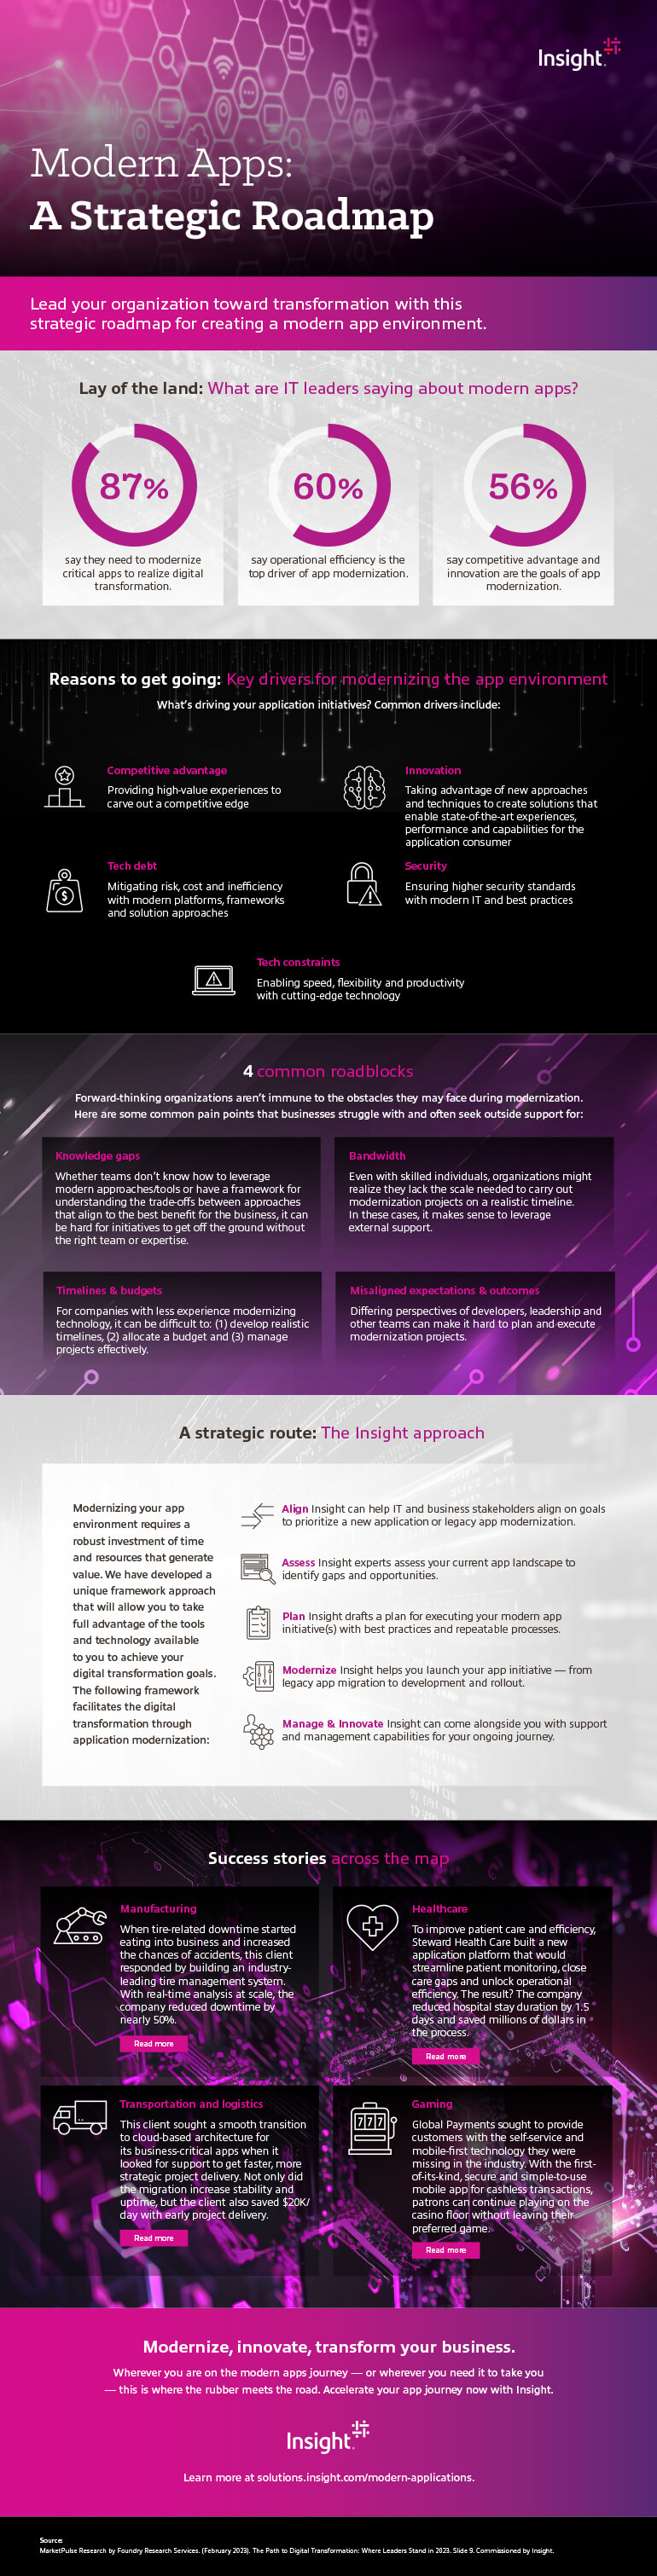 Modern Apps: A Strategic Roadmap infographic as transcribed below.